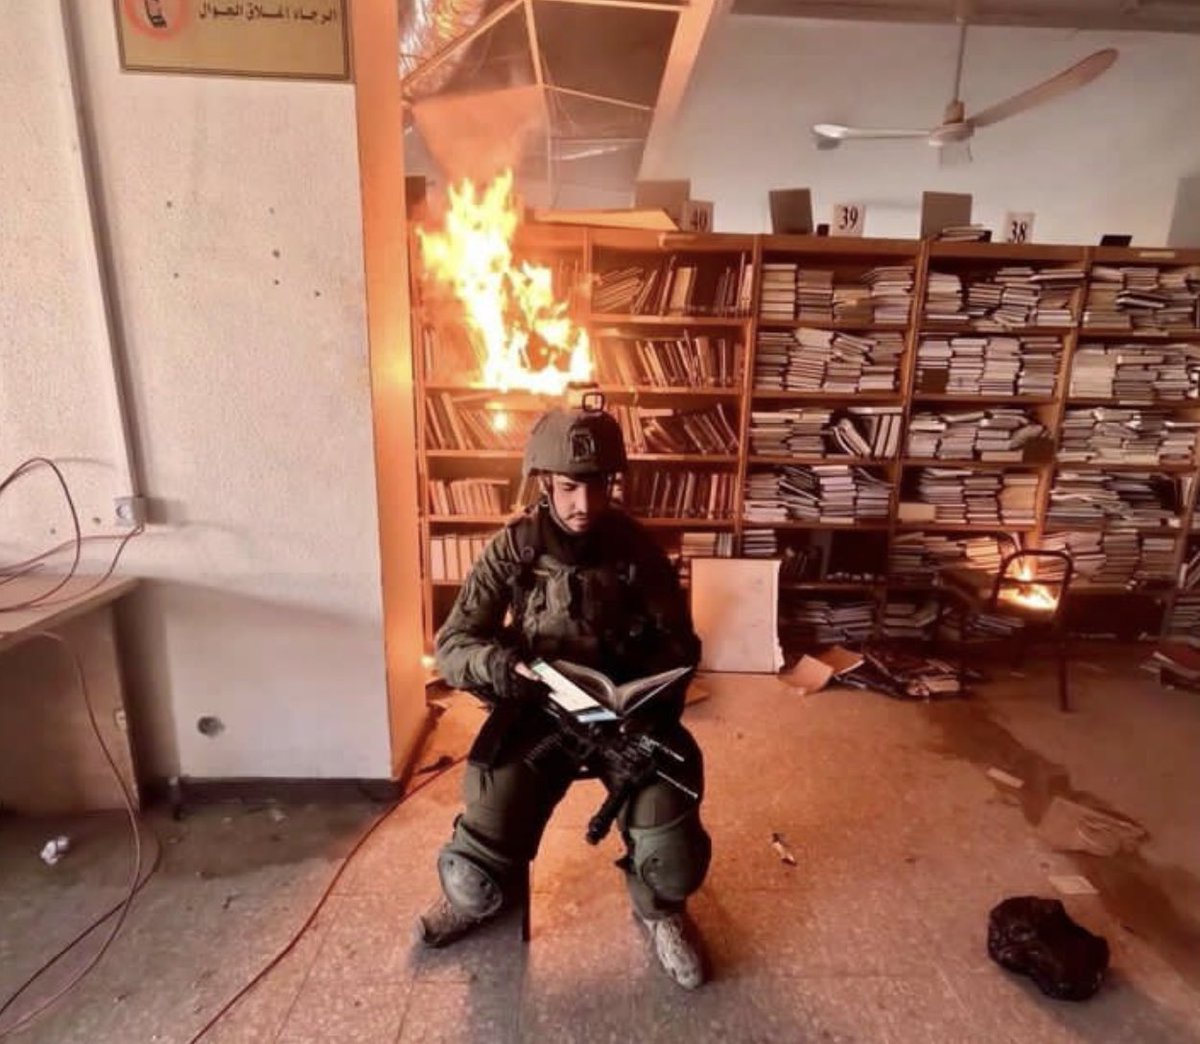 Yes, it's exactly what you see... This Israeli soldier set fire to the library of the al-Aqsa University in #Gaza to create a dramatic backdrop for his photograph!